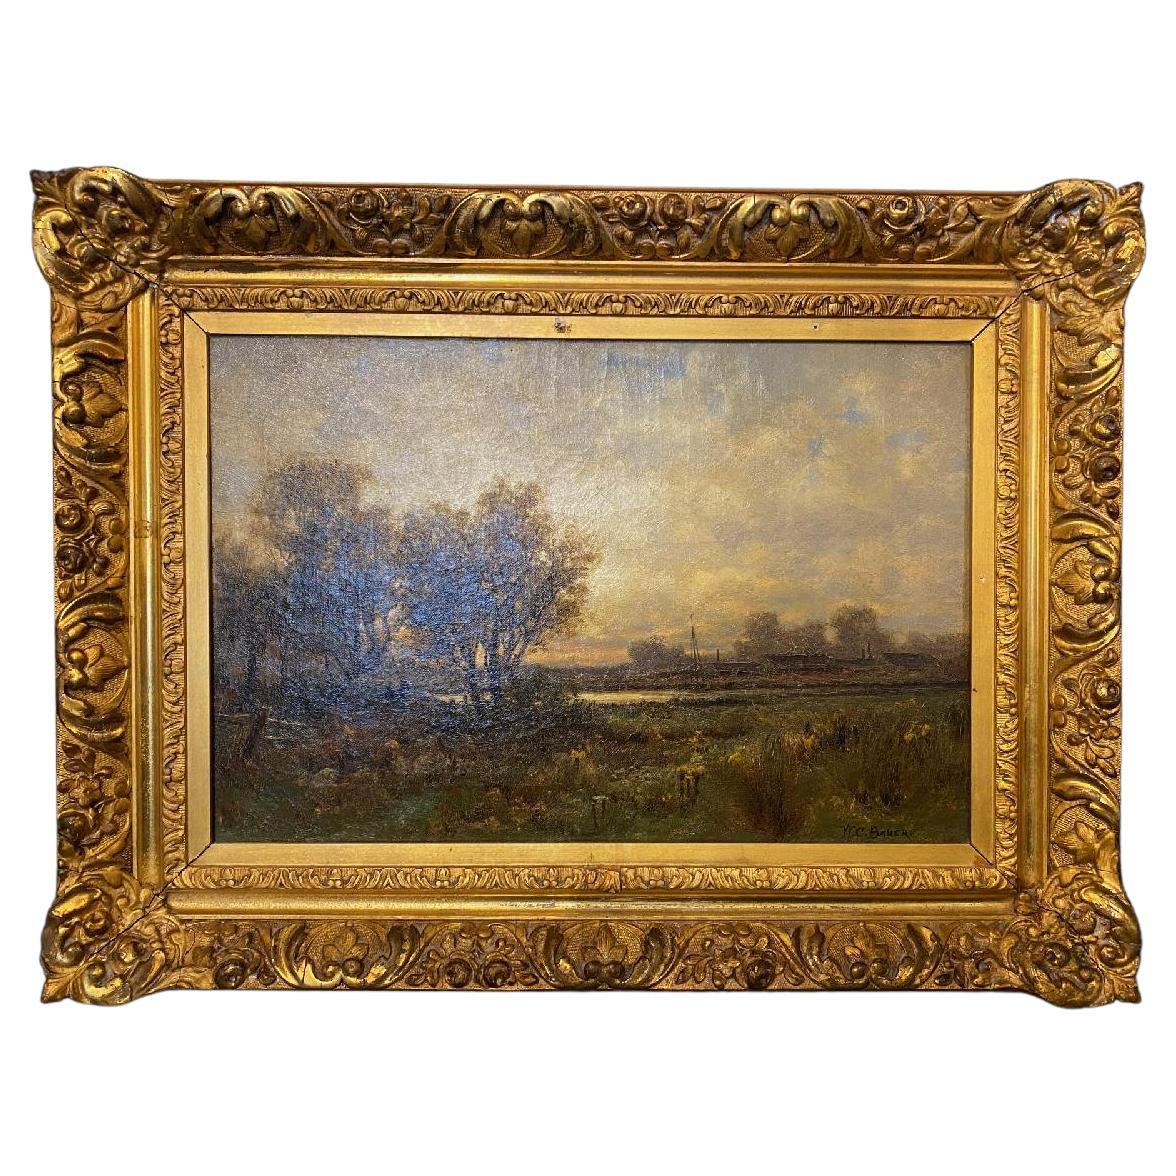 19th Century American Oil on Canvas Painting of Landscape in Gold Gilt Frame